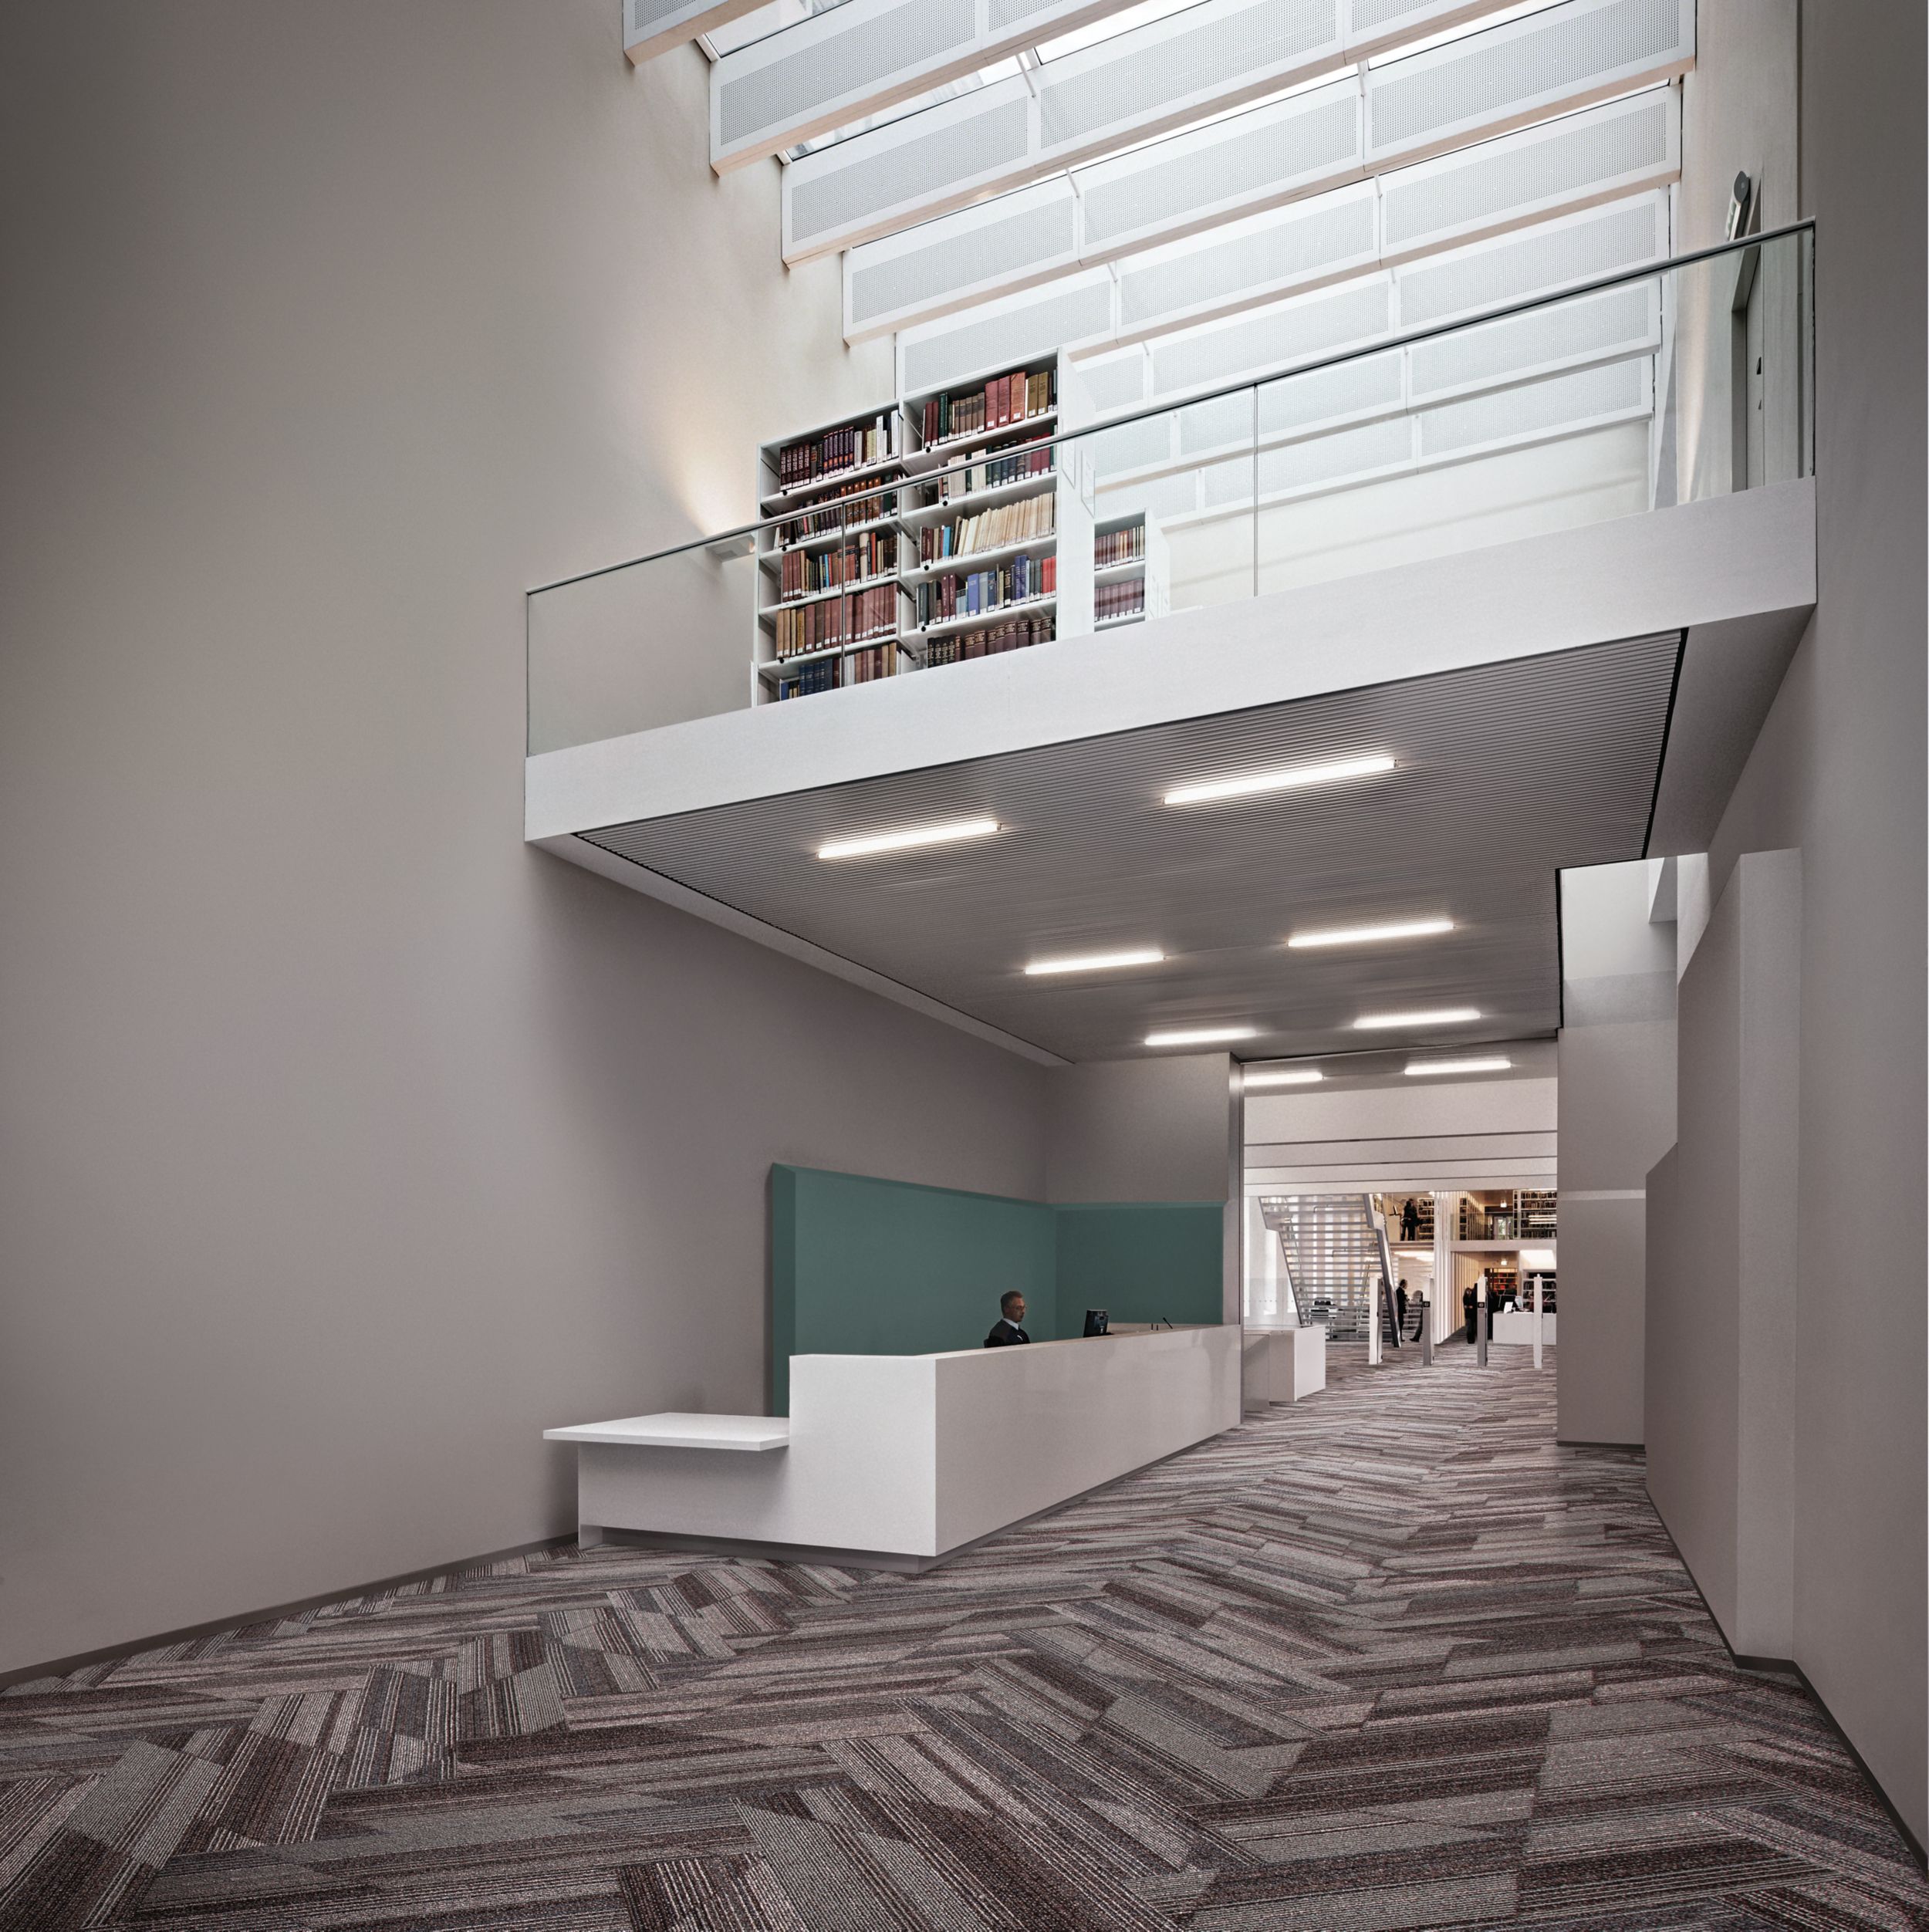 Interface Driftwood plank carpet tile in receptionist area of library imagen número 8